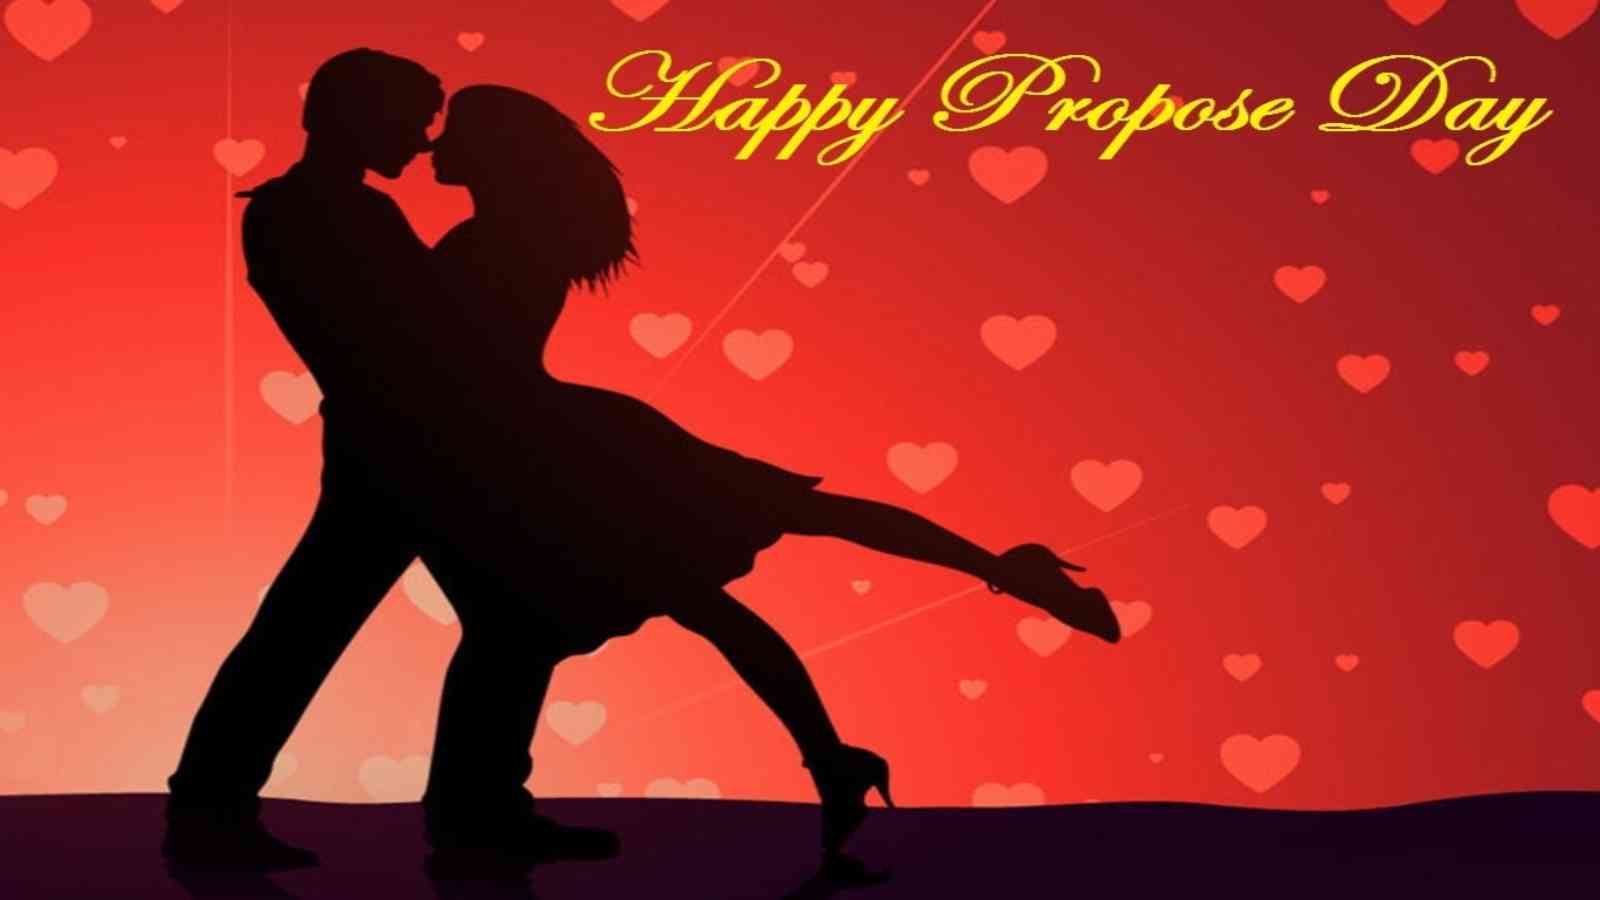 Happy Propose Day Wishes: Messages, Quotes for Valentine’s Day 2023